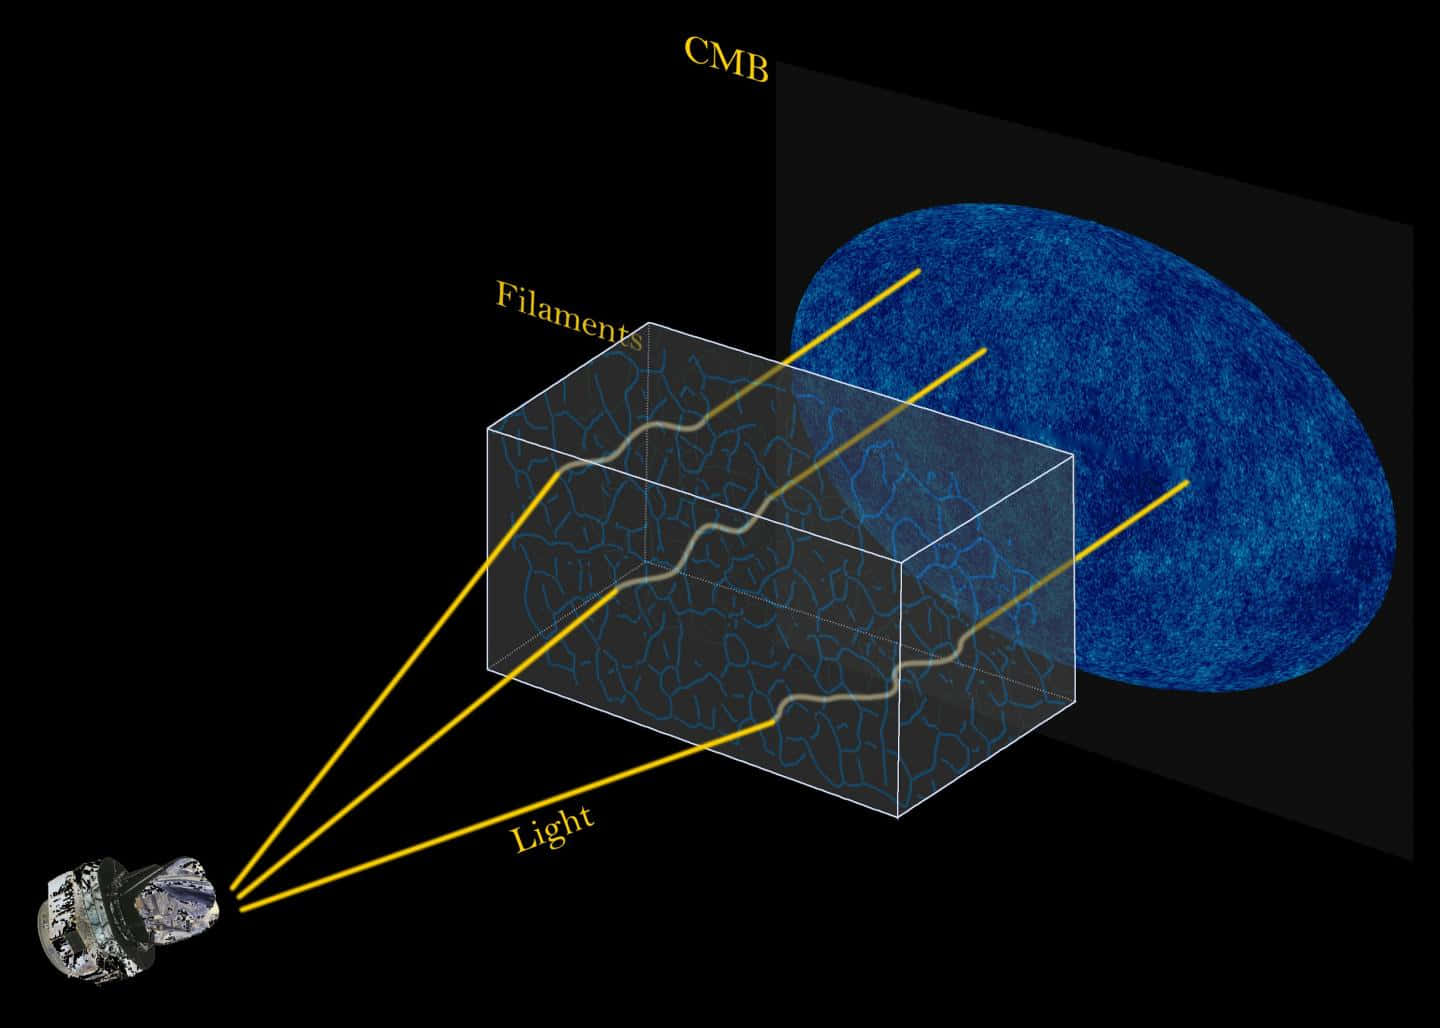 Perspective of the Universe - Visual Representation of the Cosmic Microwave Background